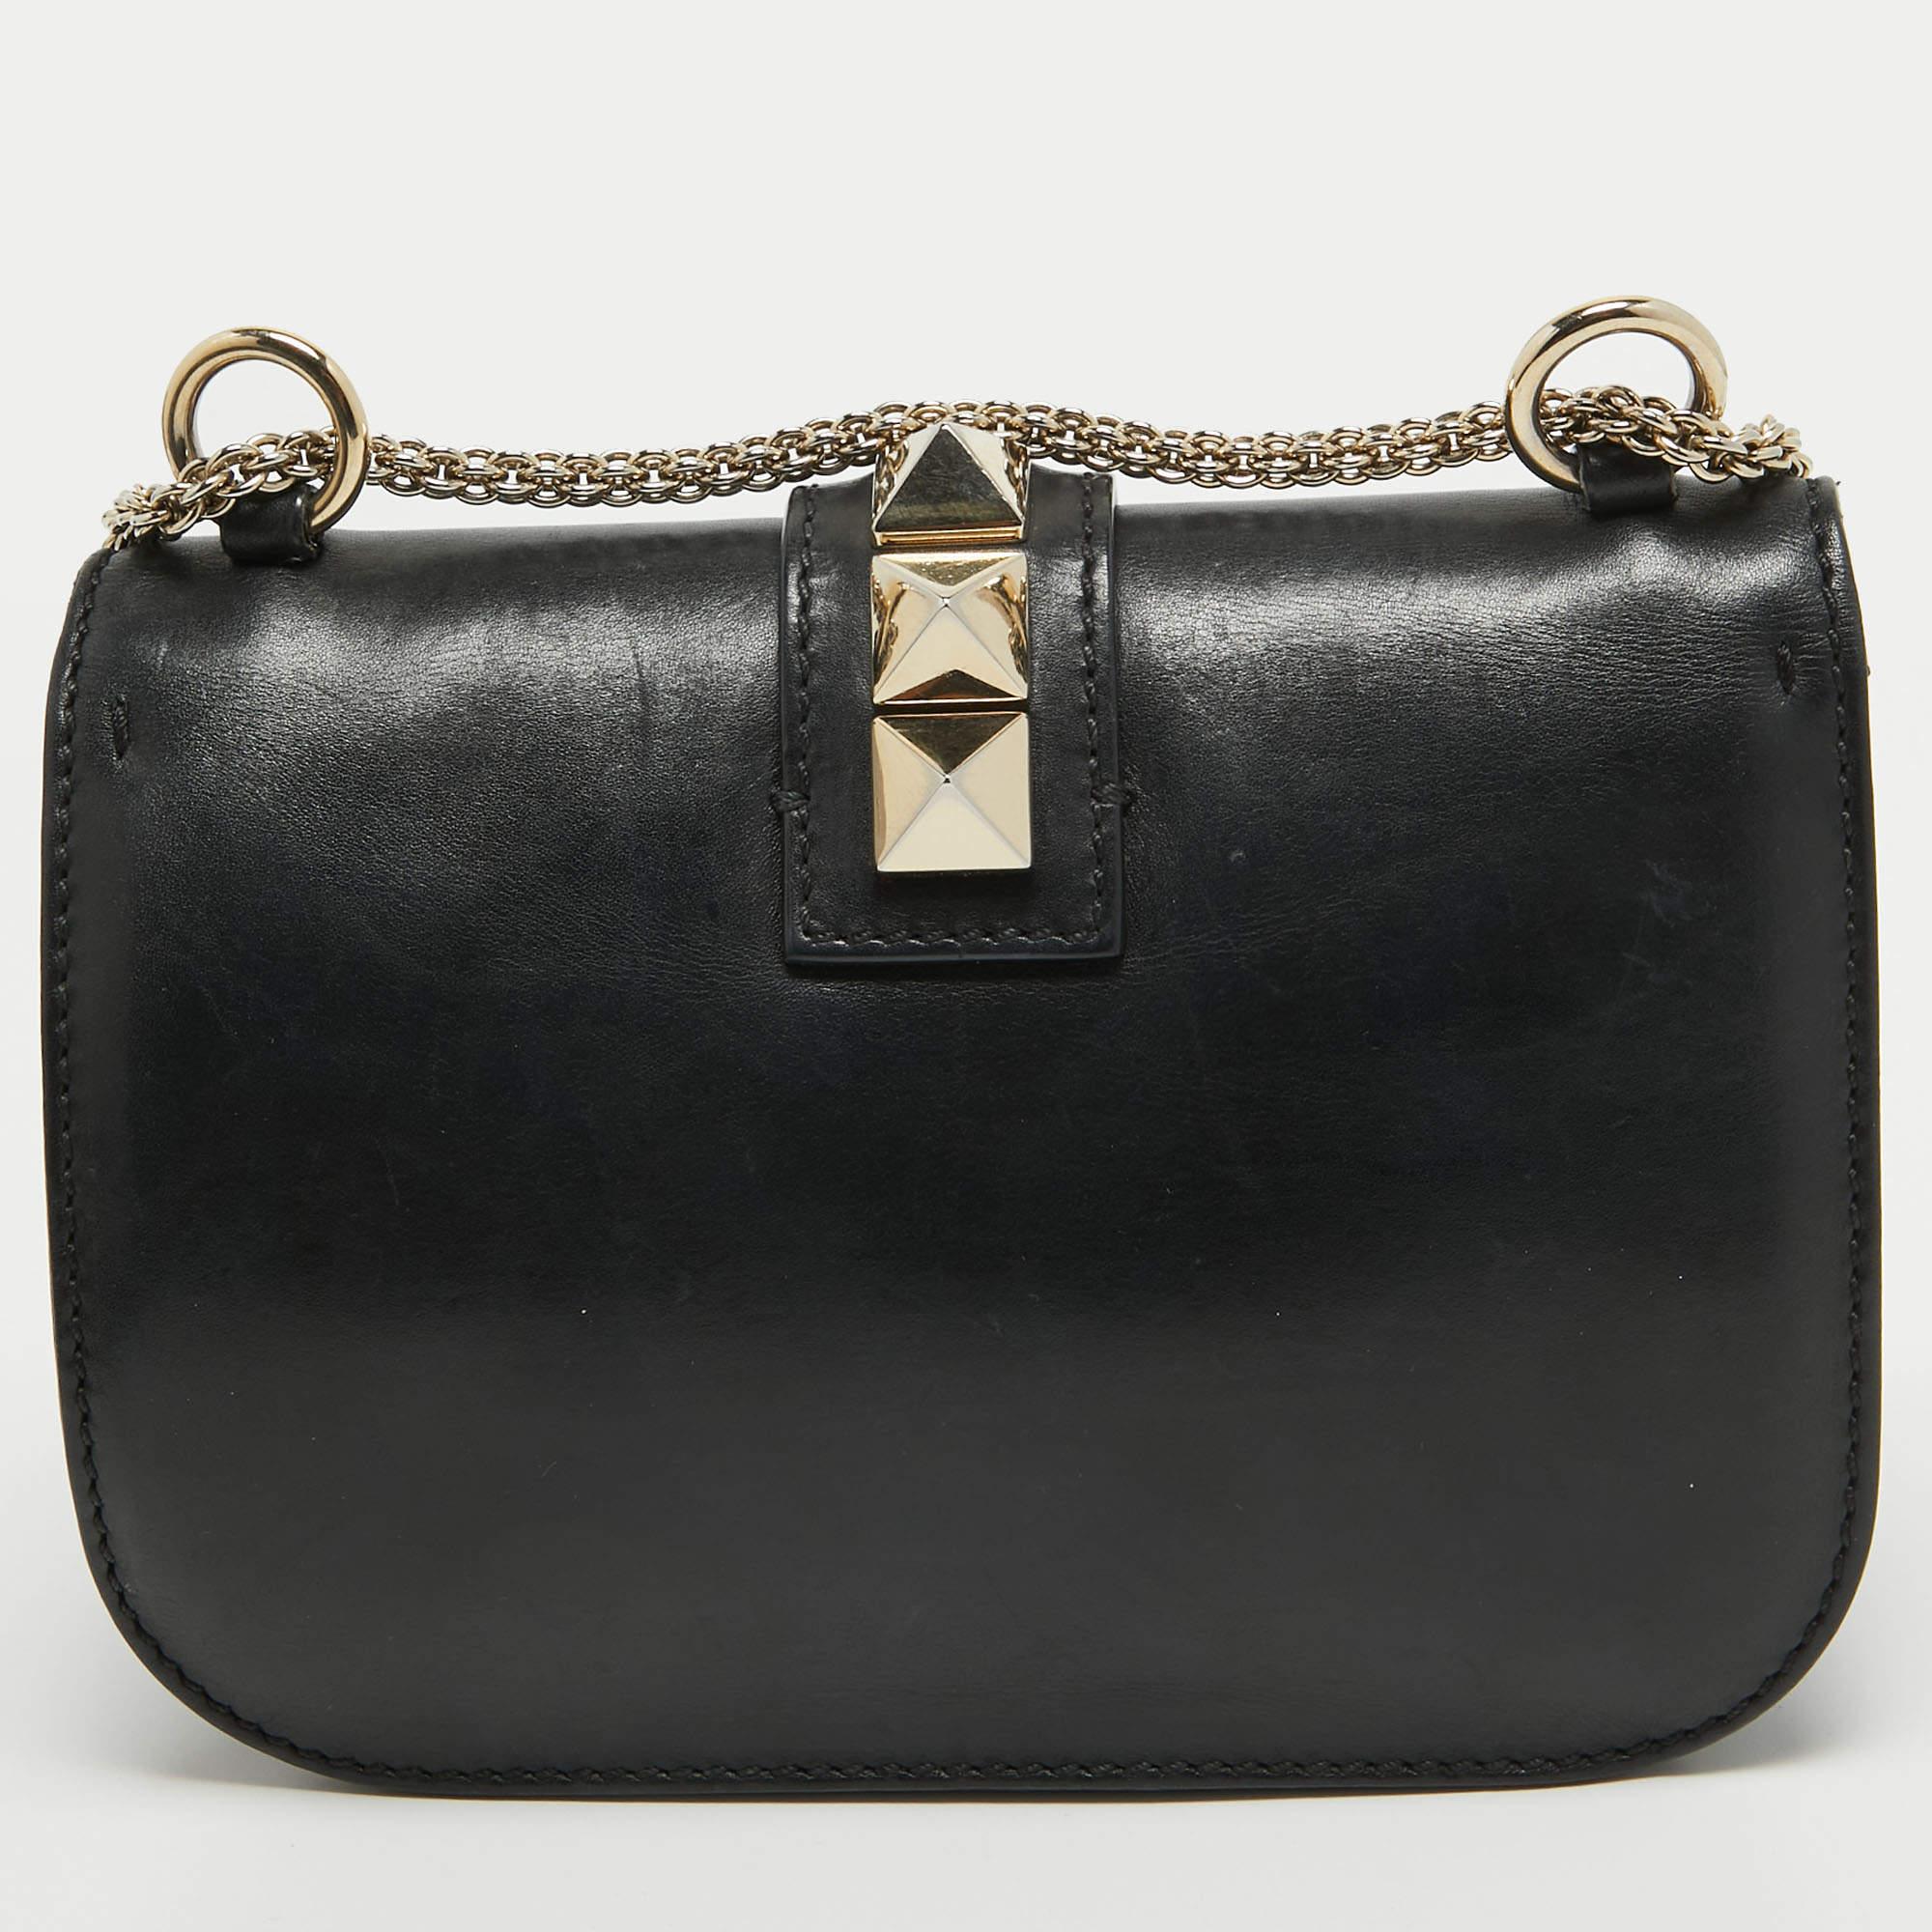 If you are looking for a bag that presents ageless style, this Valentino creation is the answer. Crafted from leather in a black shade, this piece comes with a slender chain strap and a flap with a push-lock to secure the well-sized interior. The